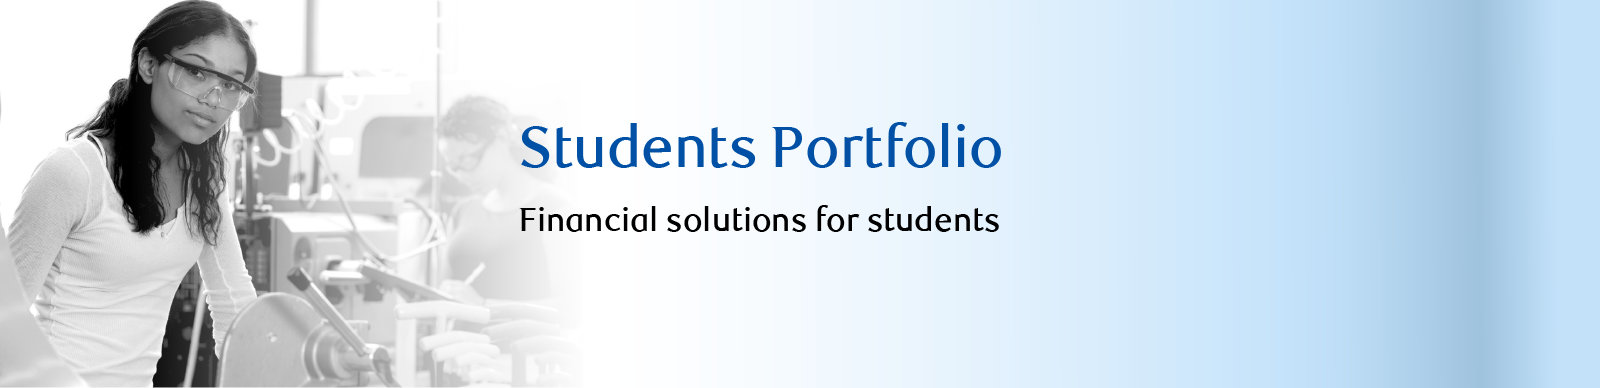 Students & Interns Portfolio.Financial Solutions for students,residents and interns